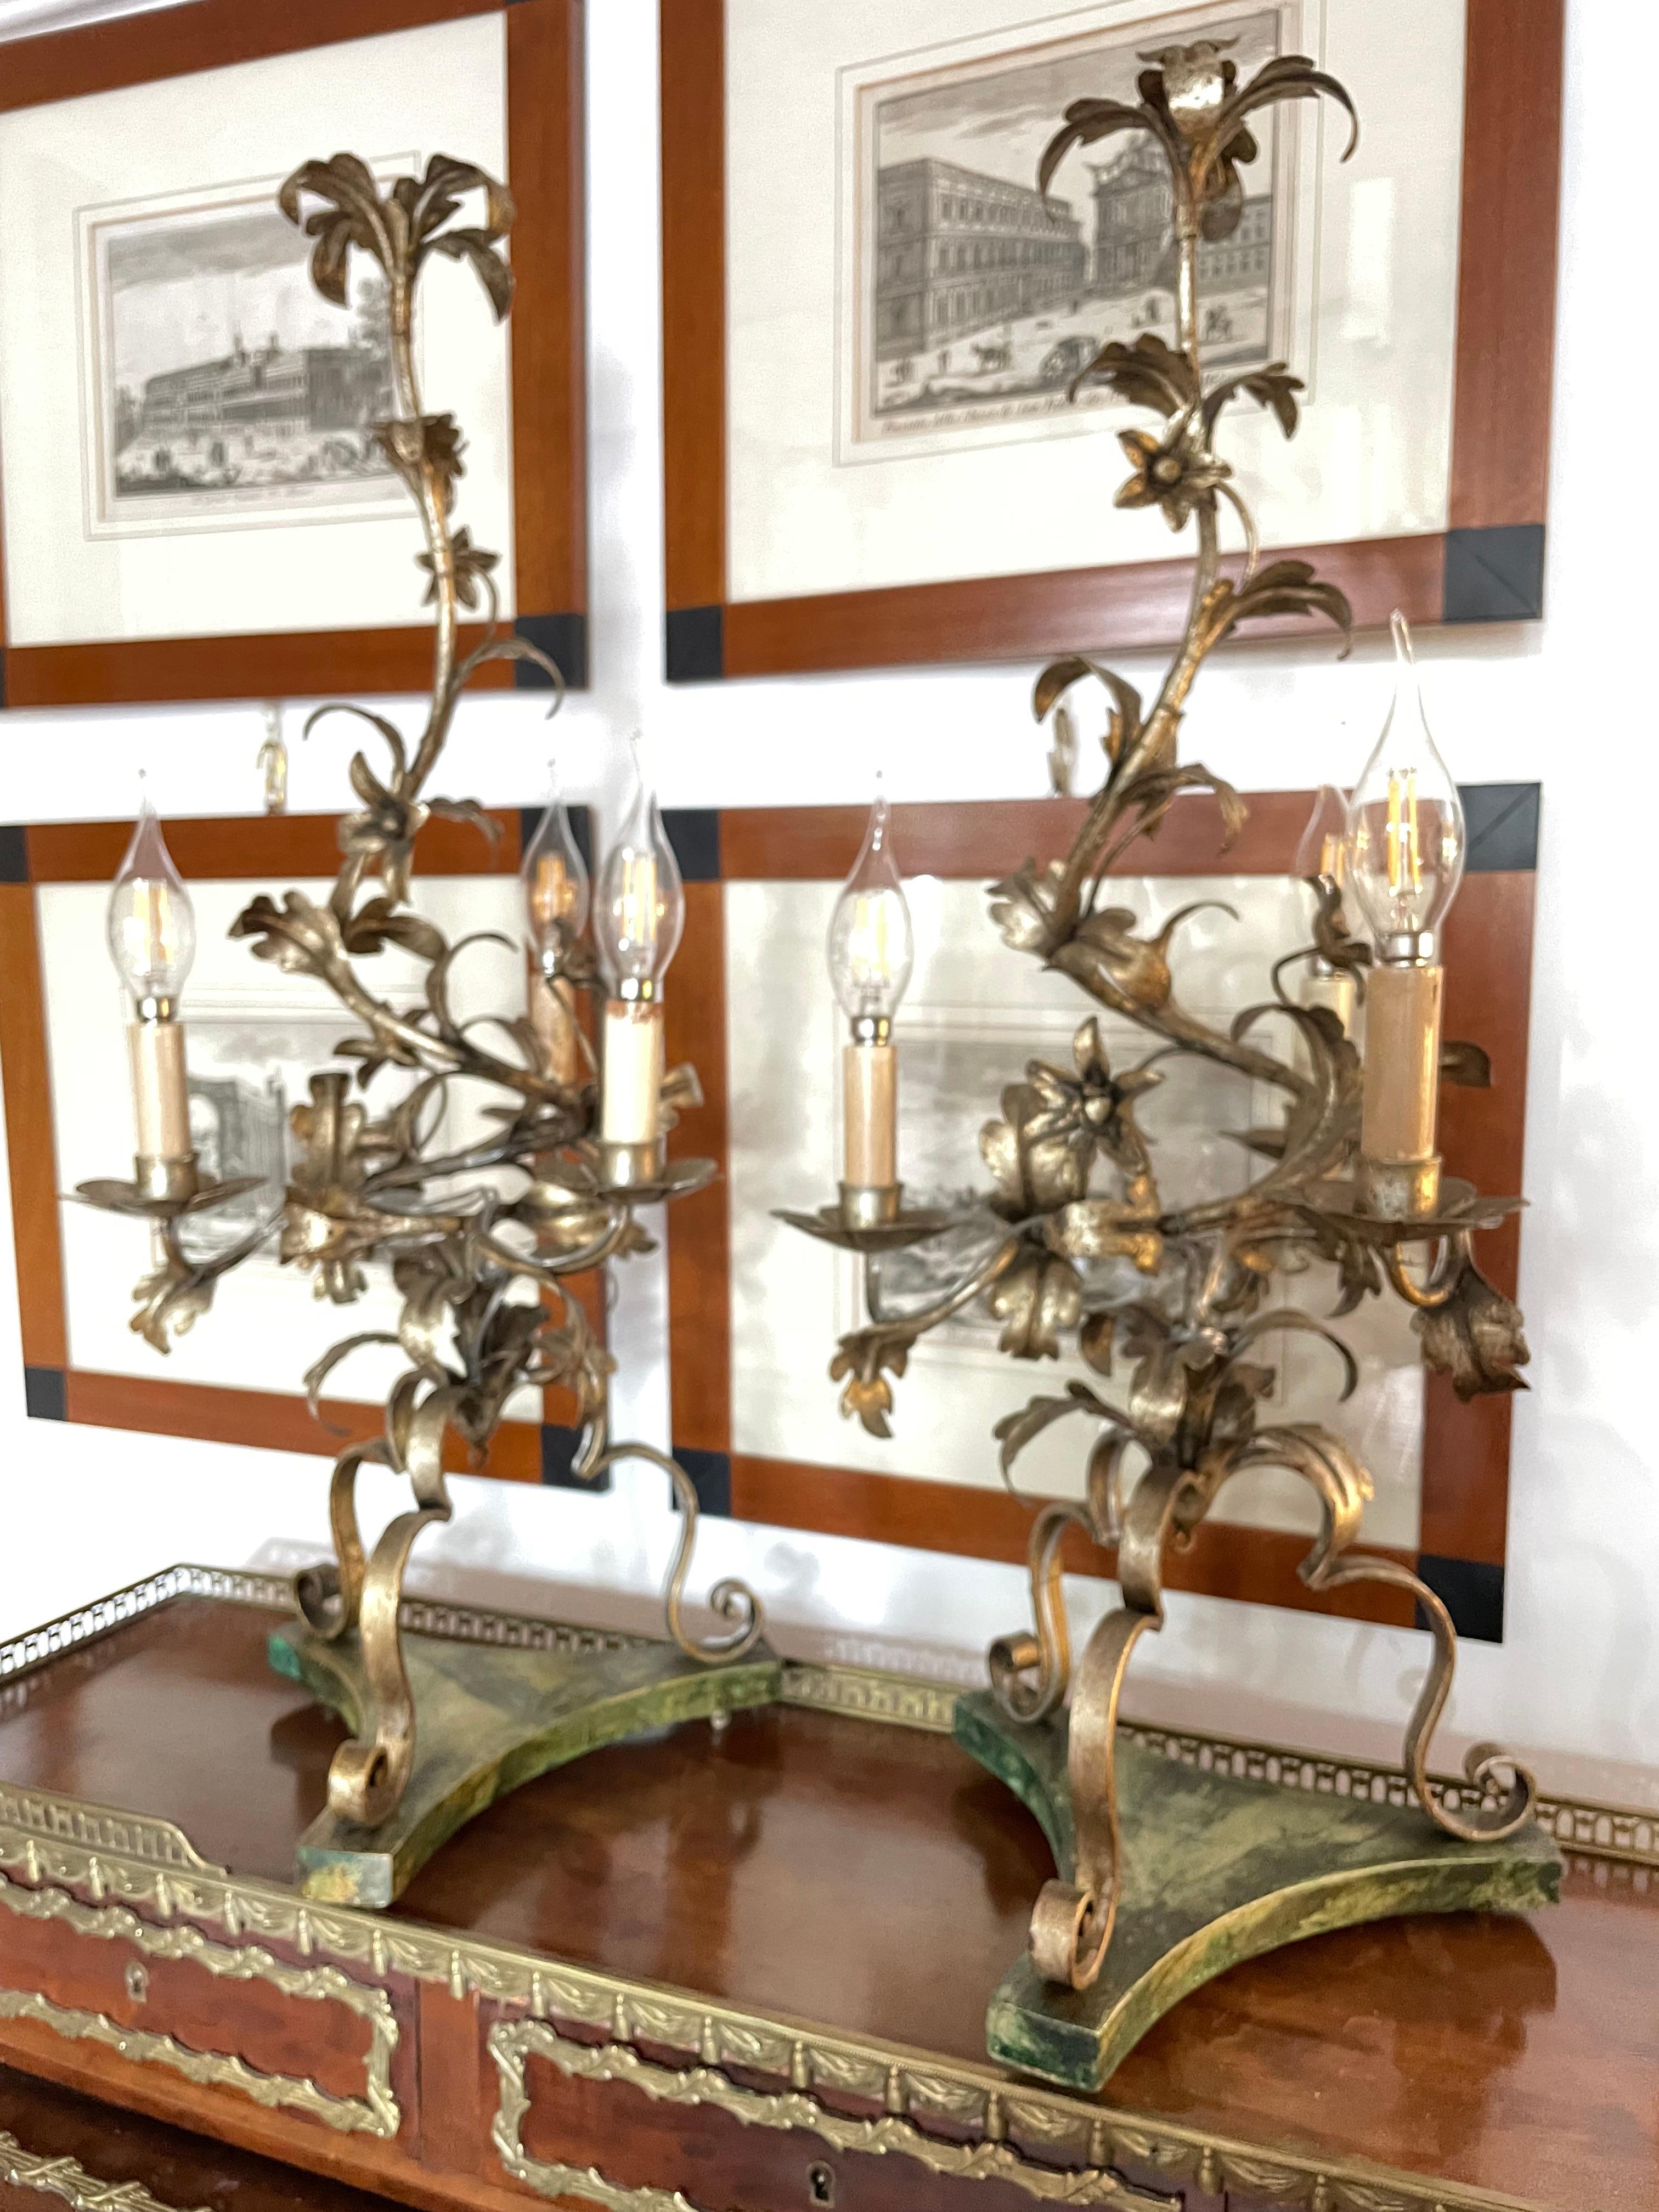 Pair of Italian Floral Table Lamps 20th Century Wrought iron Candelabra For Sale 5